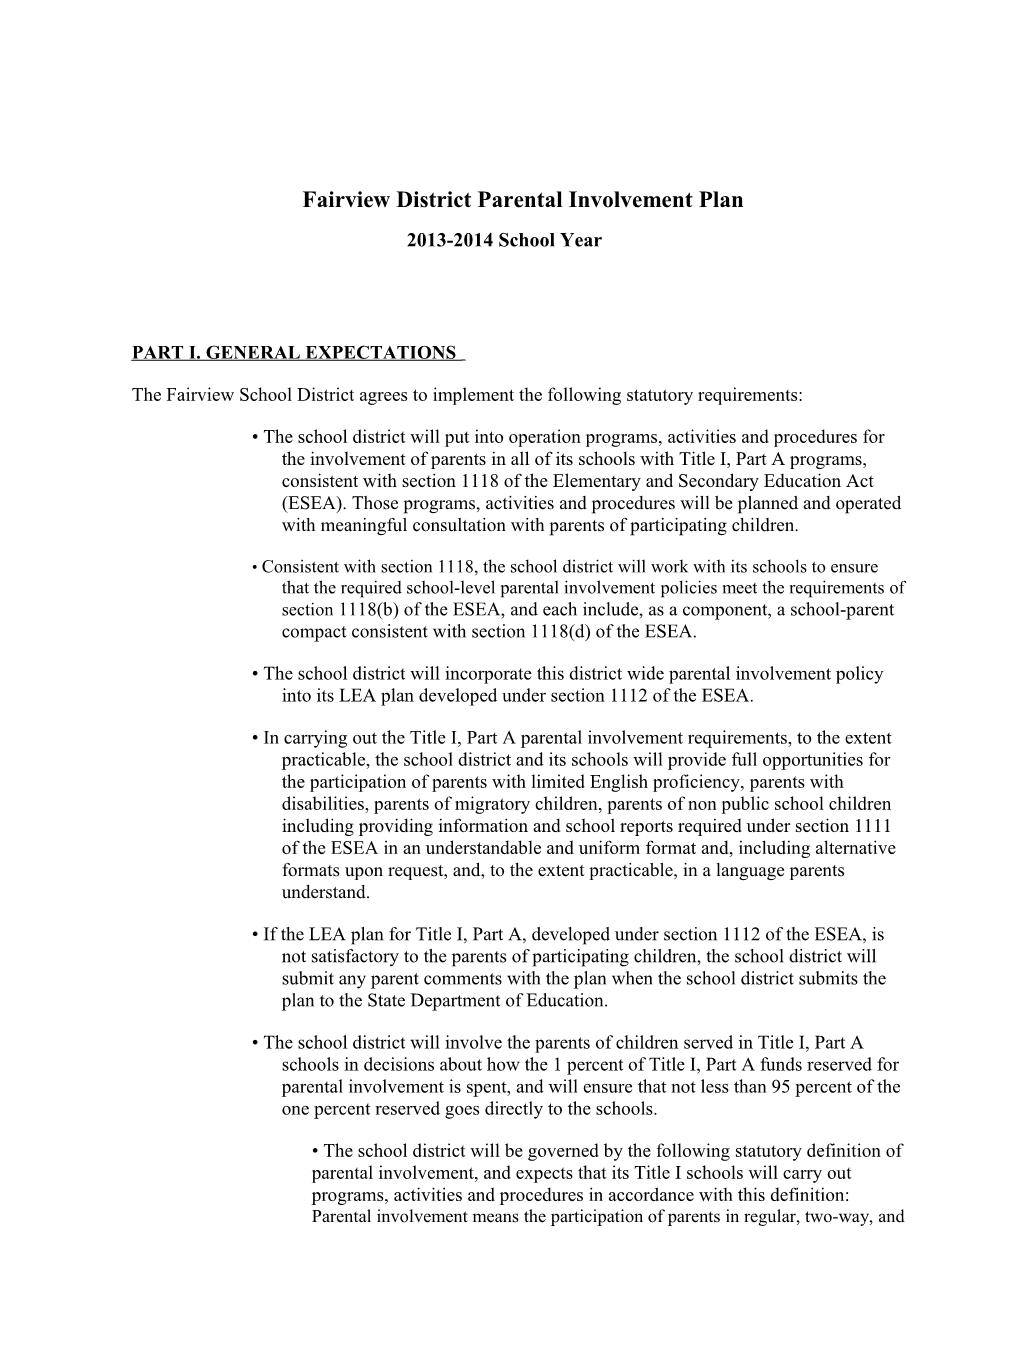 Fairview District Parental Involvement Policy